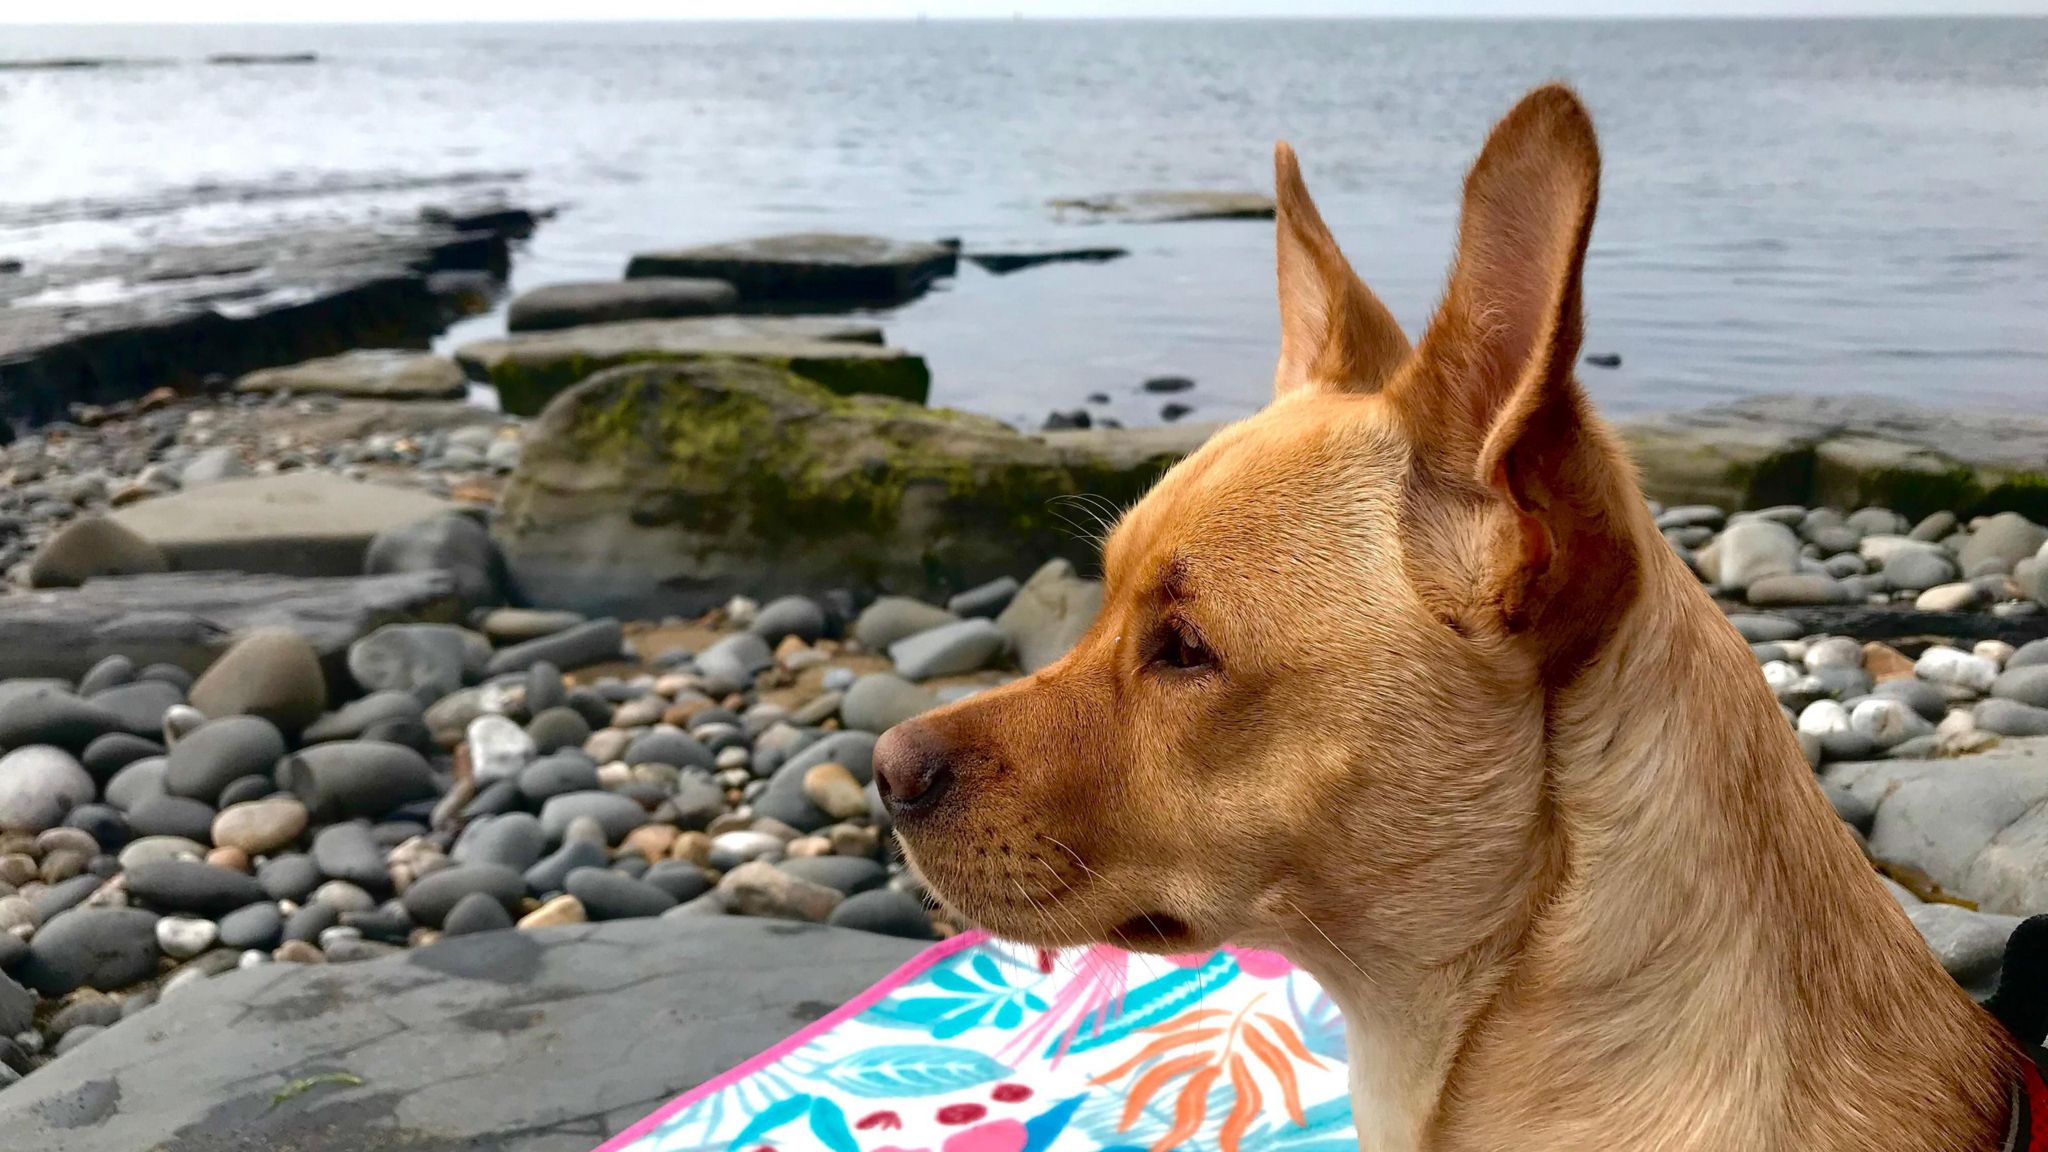 A dog stares out across a beach with rocks of differing sizes and water in the background